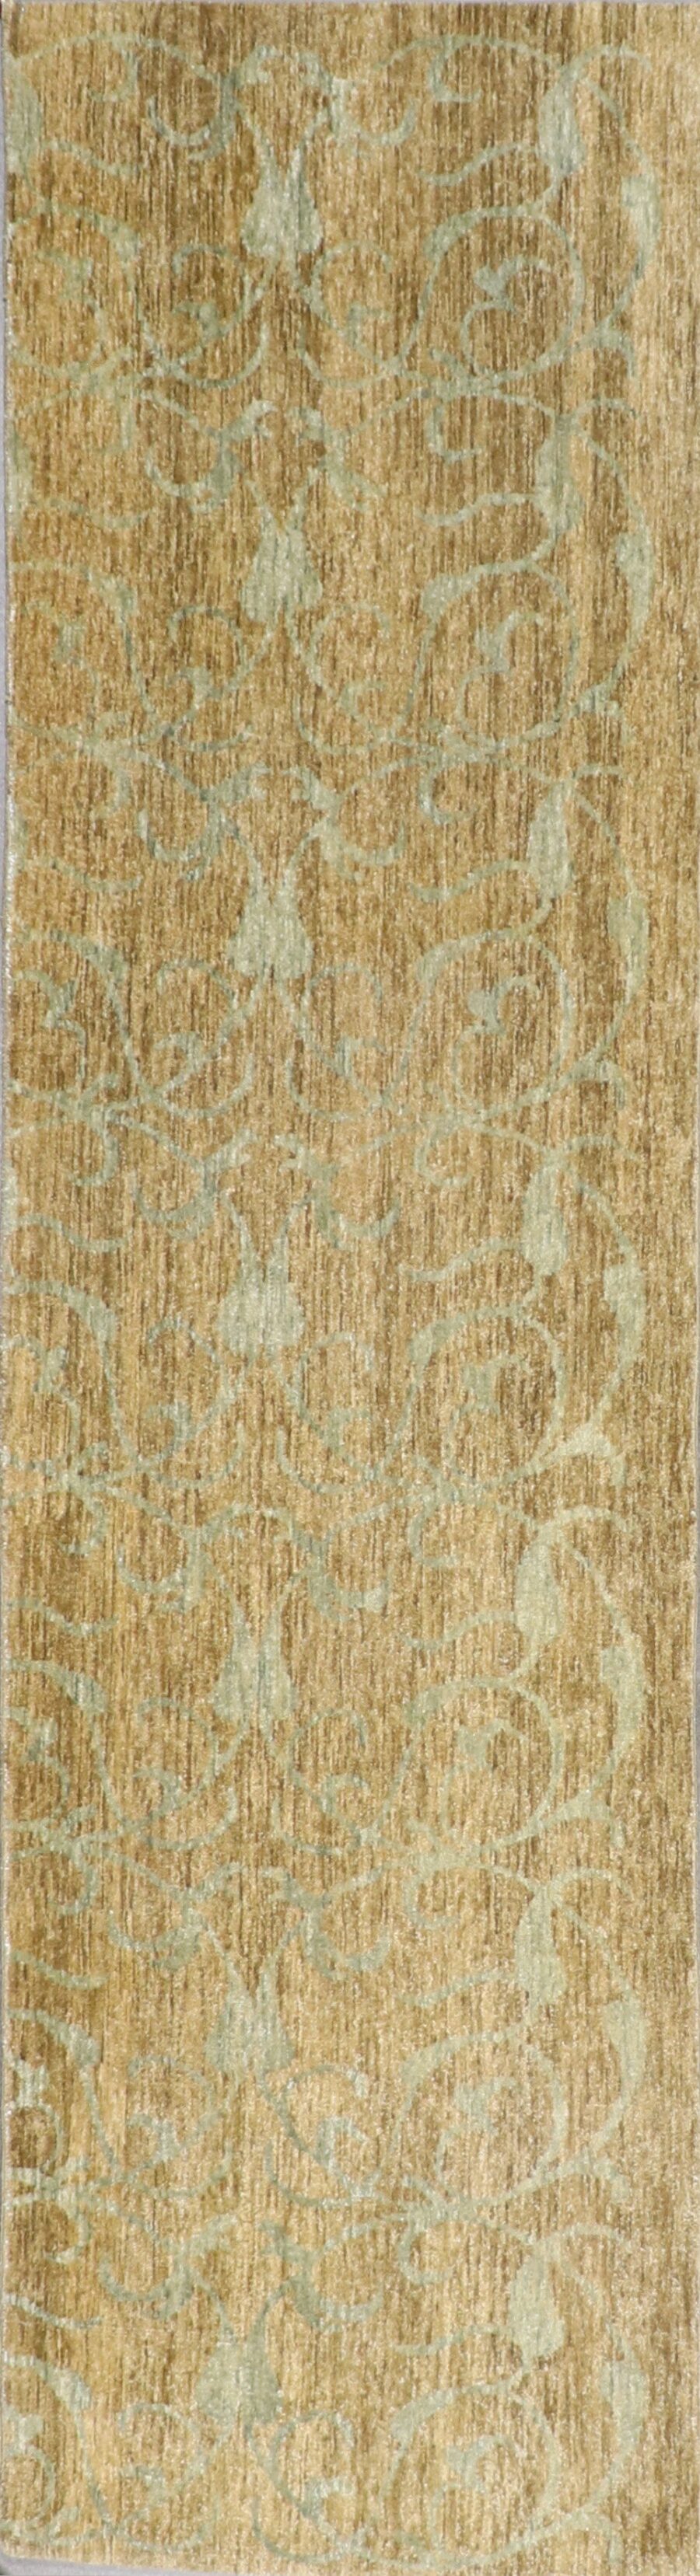 2’7”x10’ Transitional Green Wool Hand-Knotted Rug - Direct Rug Import | Rugs in Chicago, Indiana,South Bend,Granger